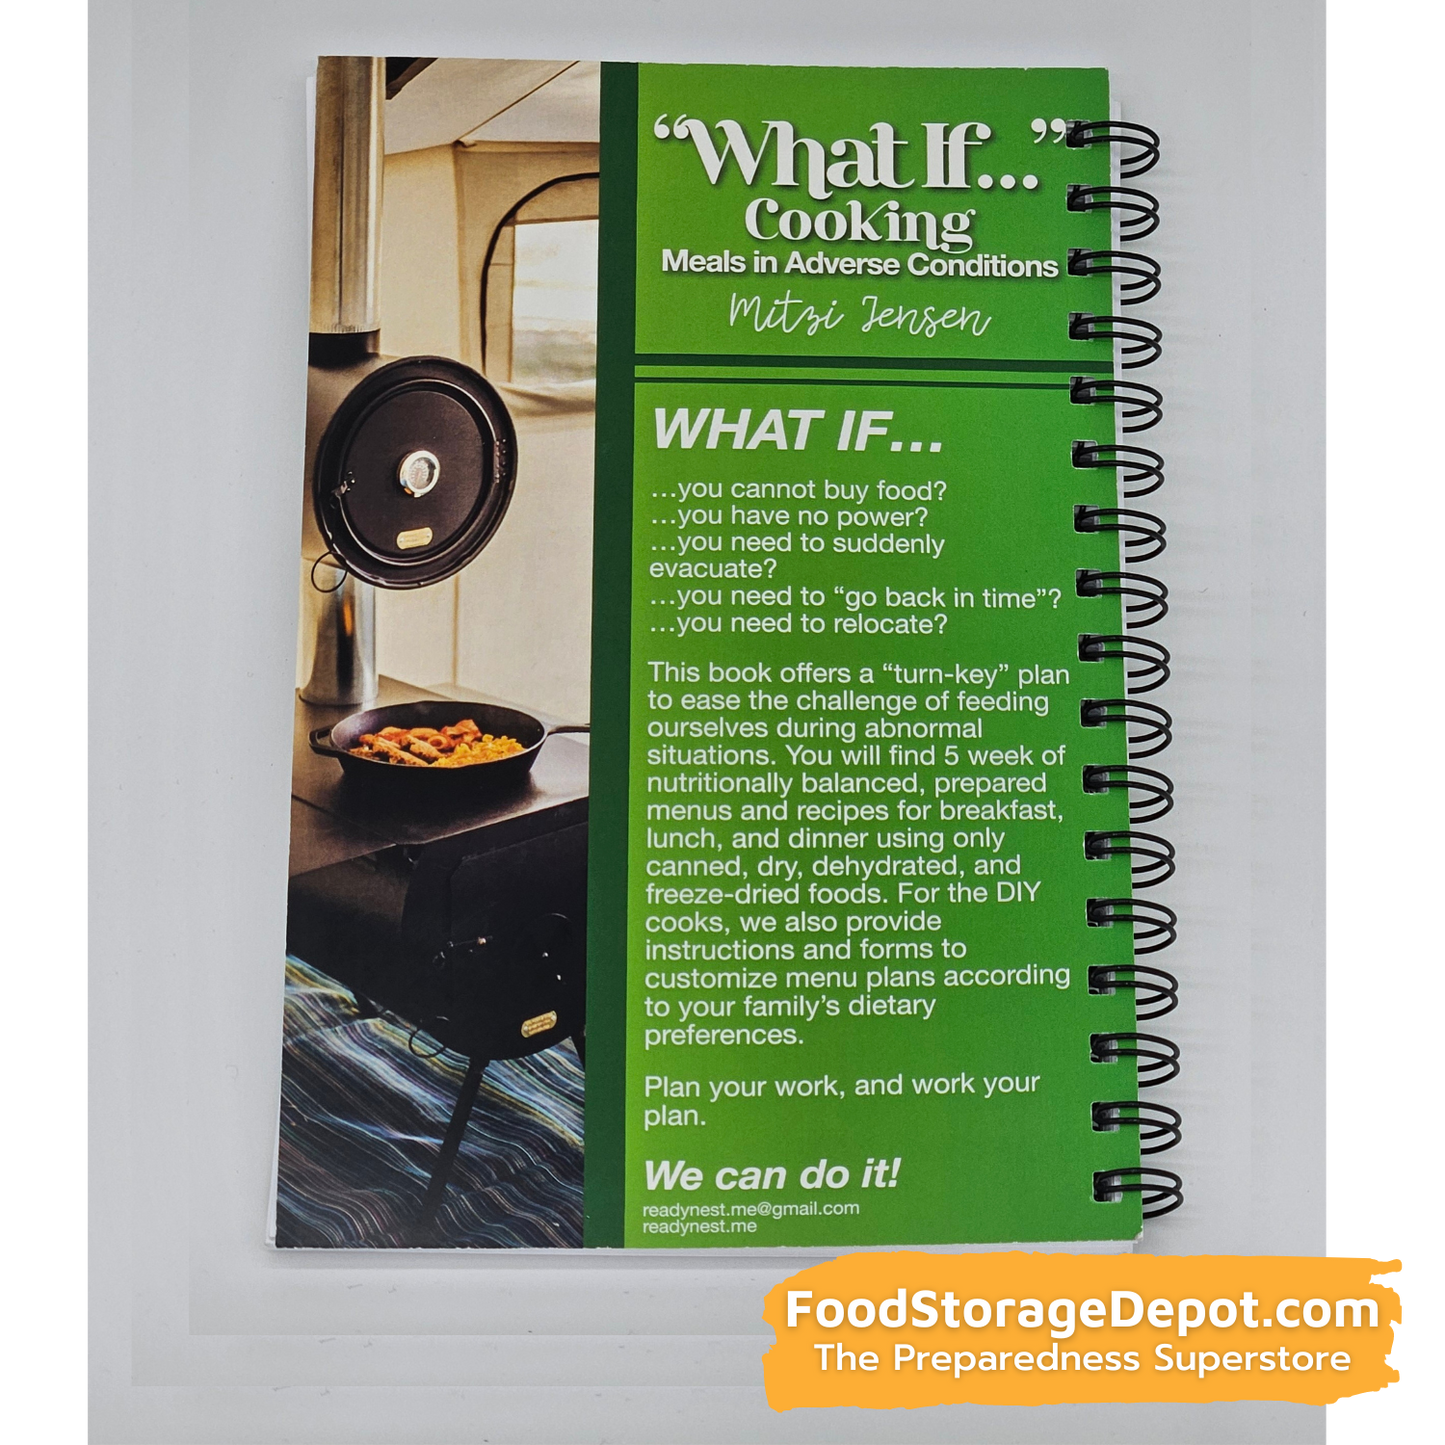 What If?---Cooking Meals in Adverse Conditions by Mitzi Jensen